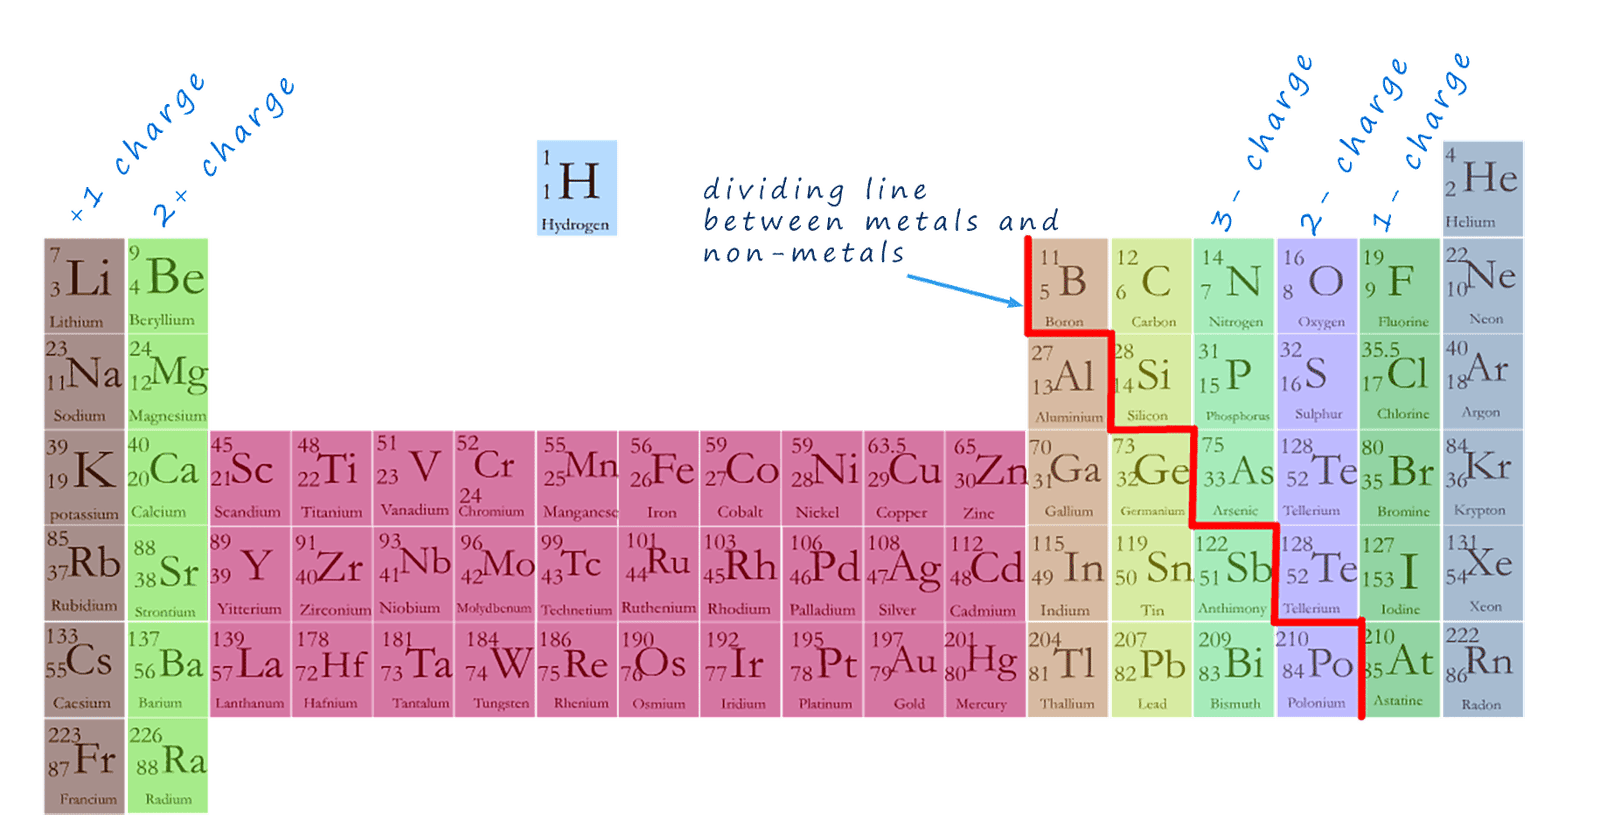 Periodic table showing the charges formed by elements when they form ions.